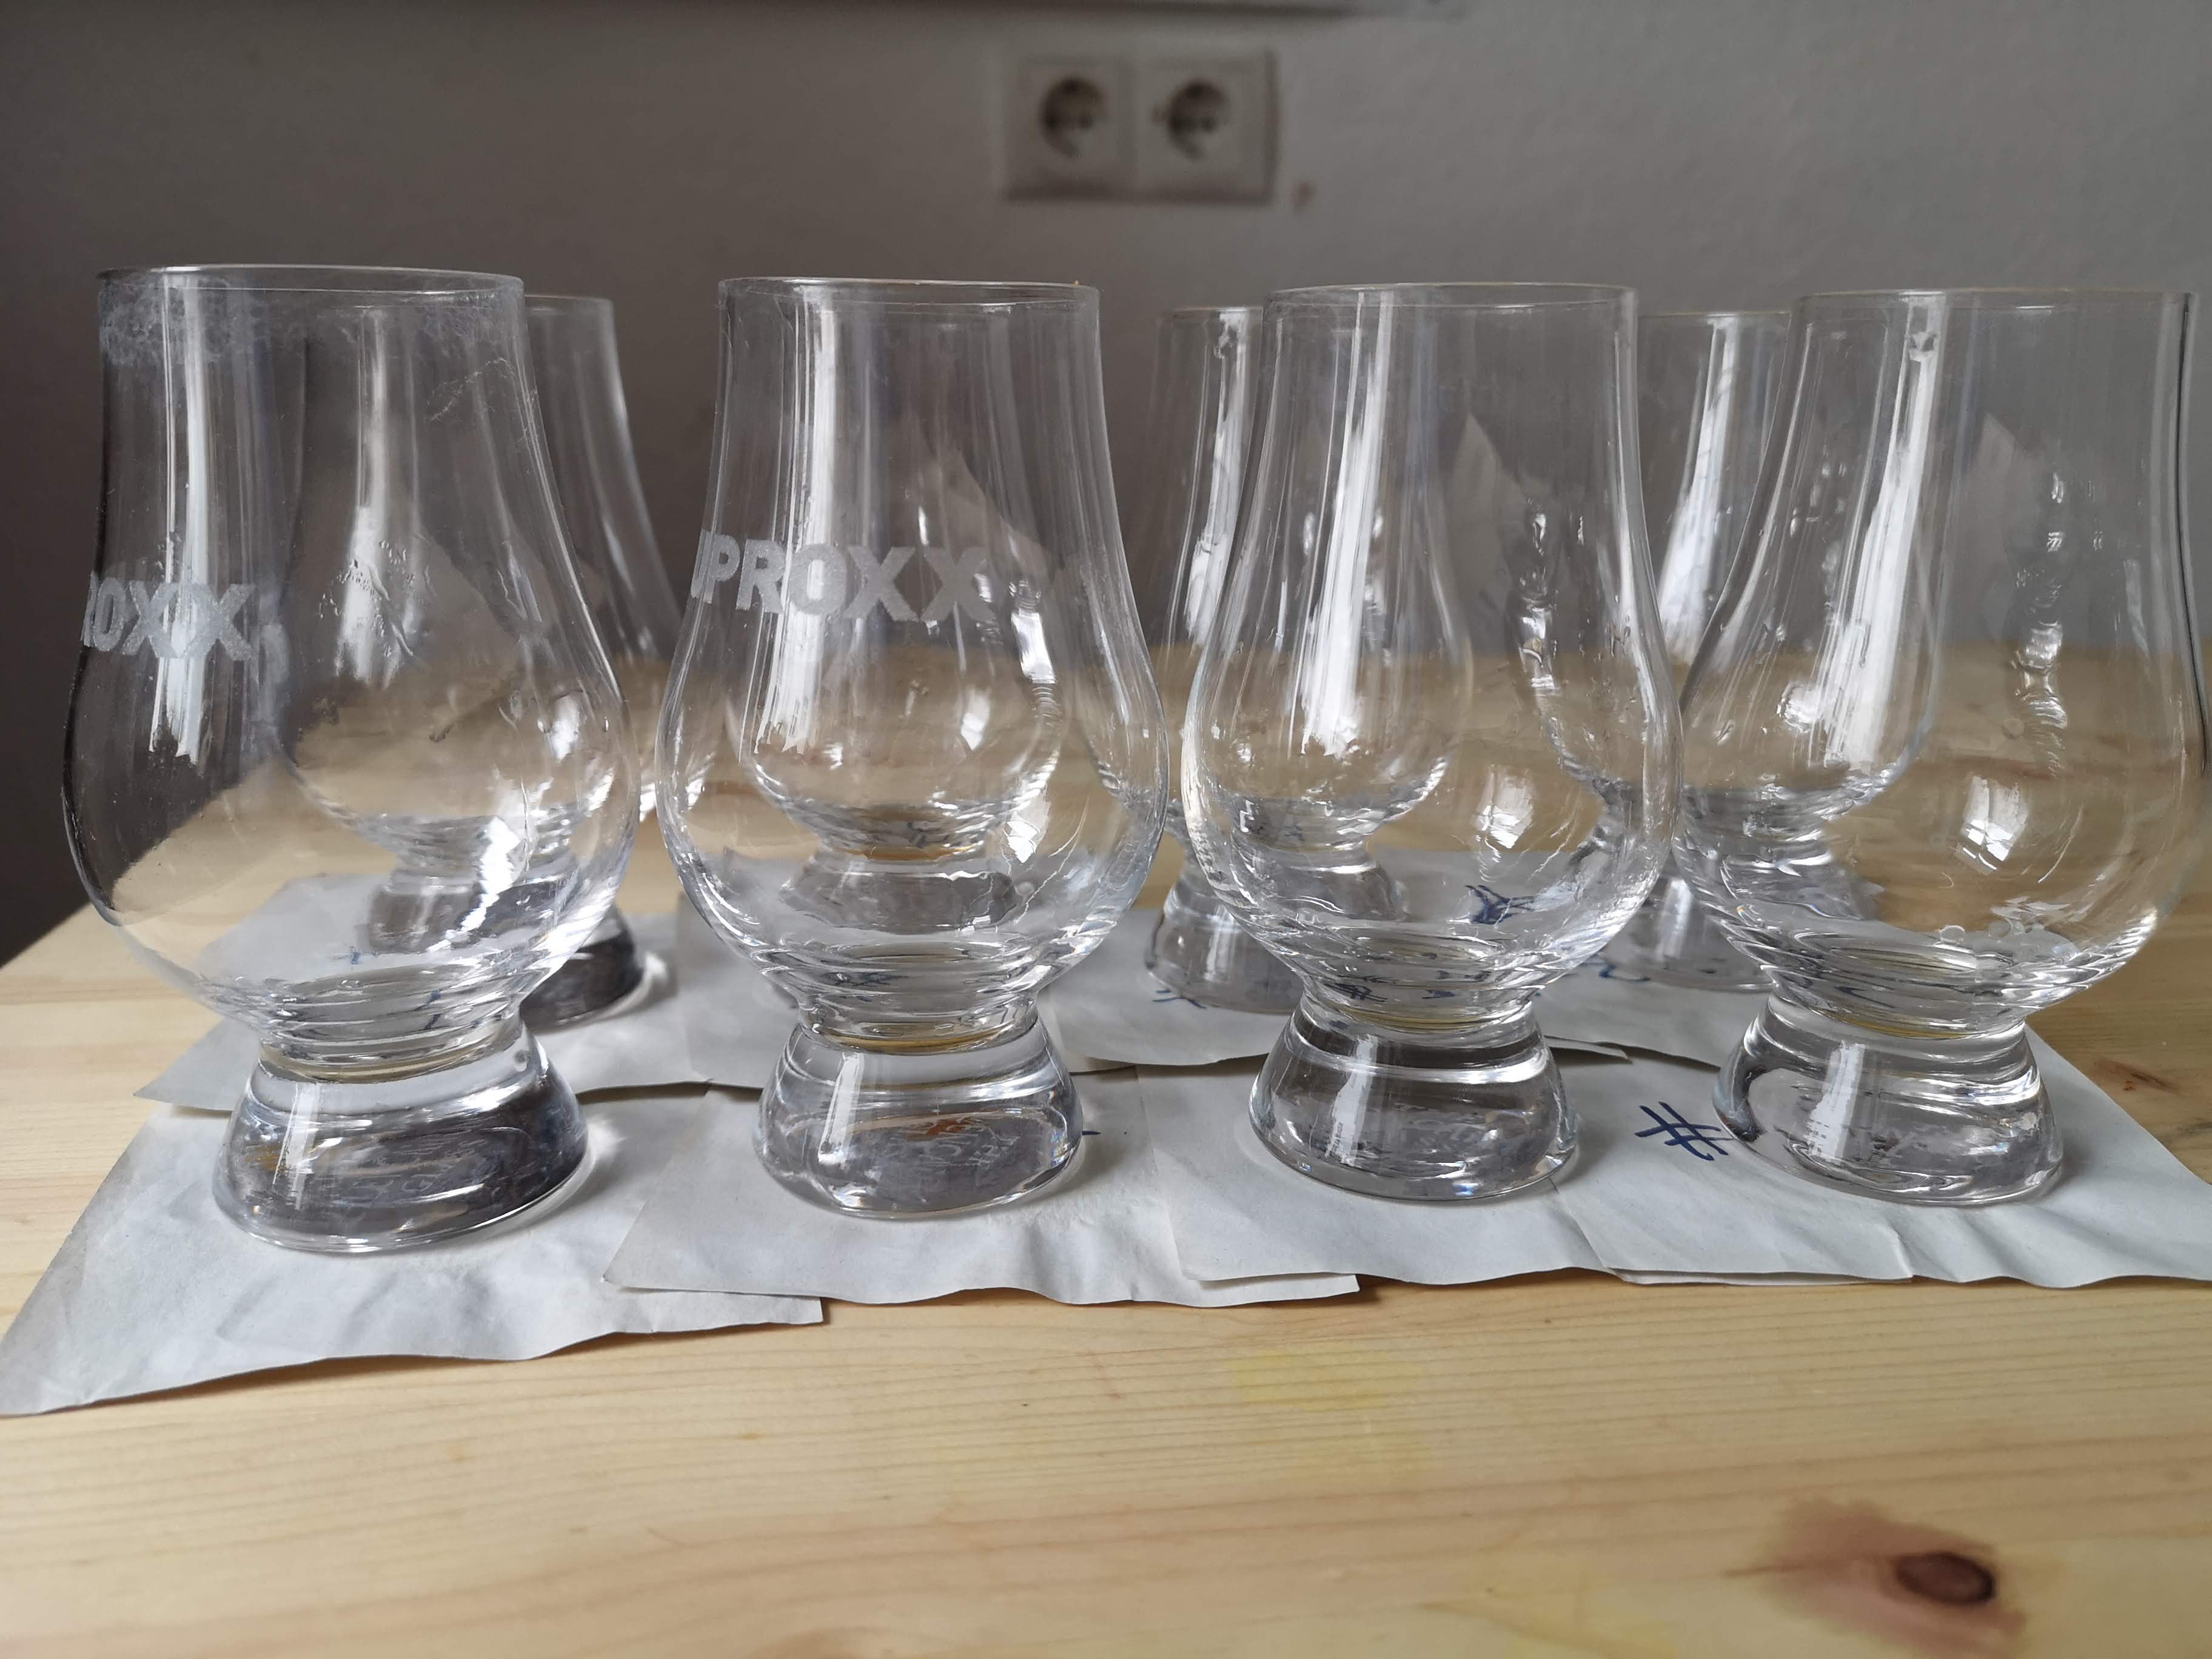 Peated Scotch Whisky Blind